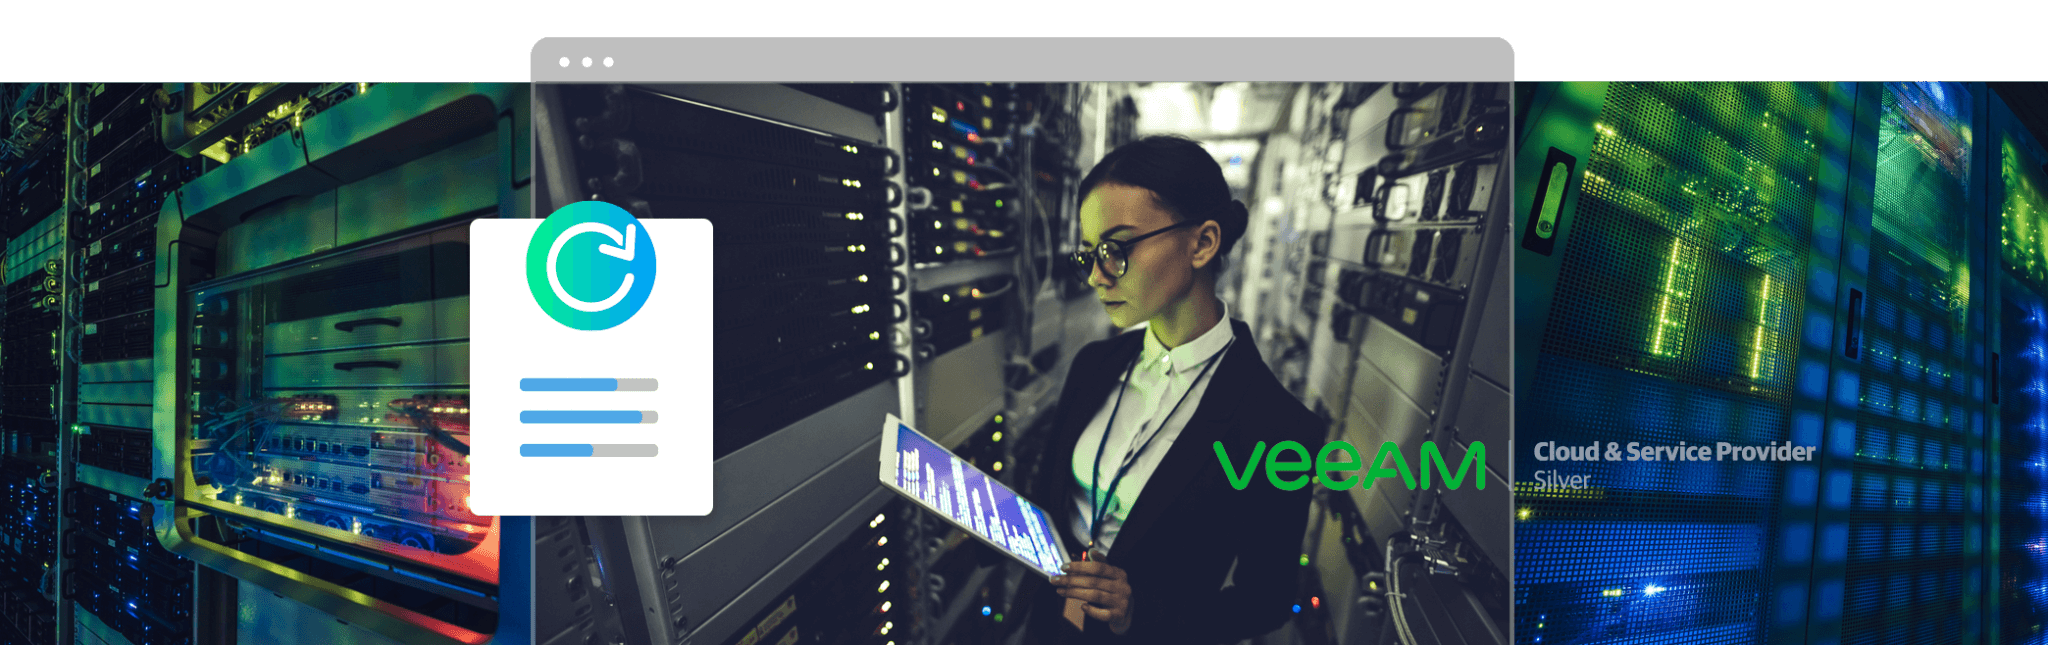 features section veeam